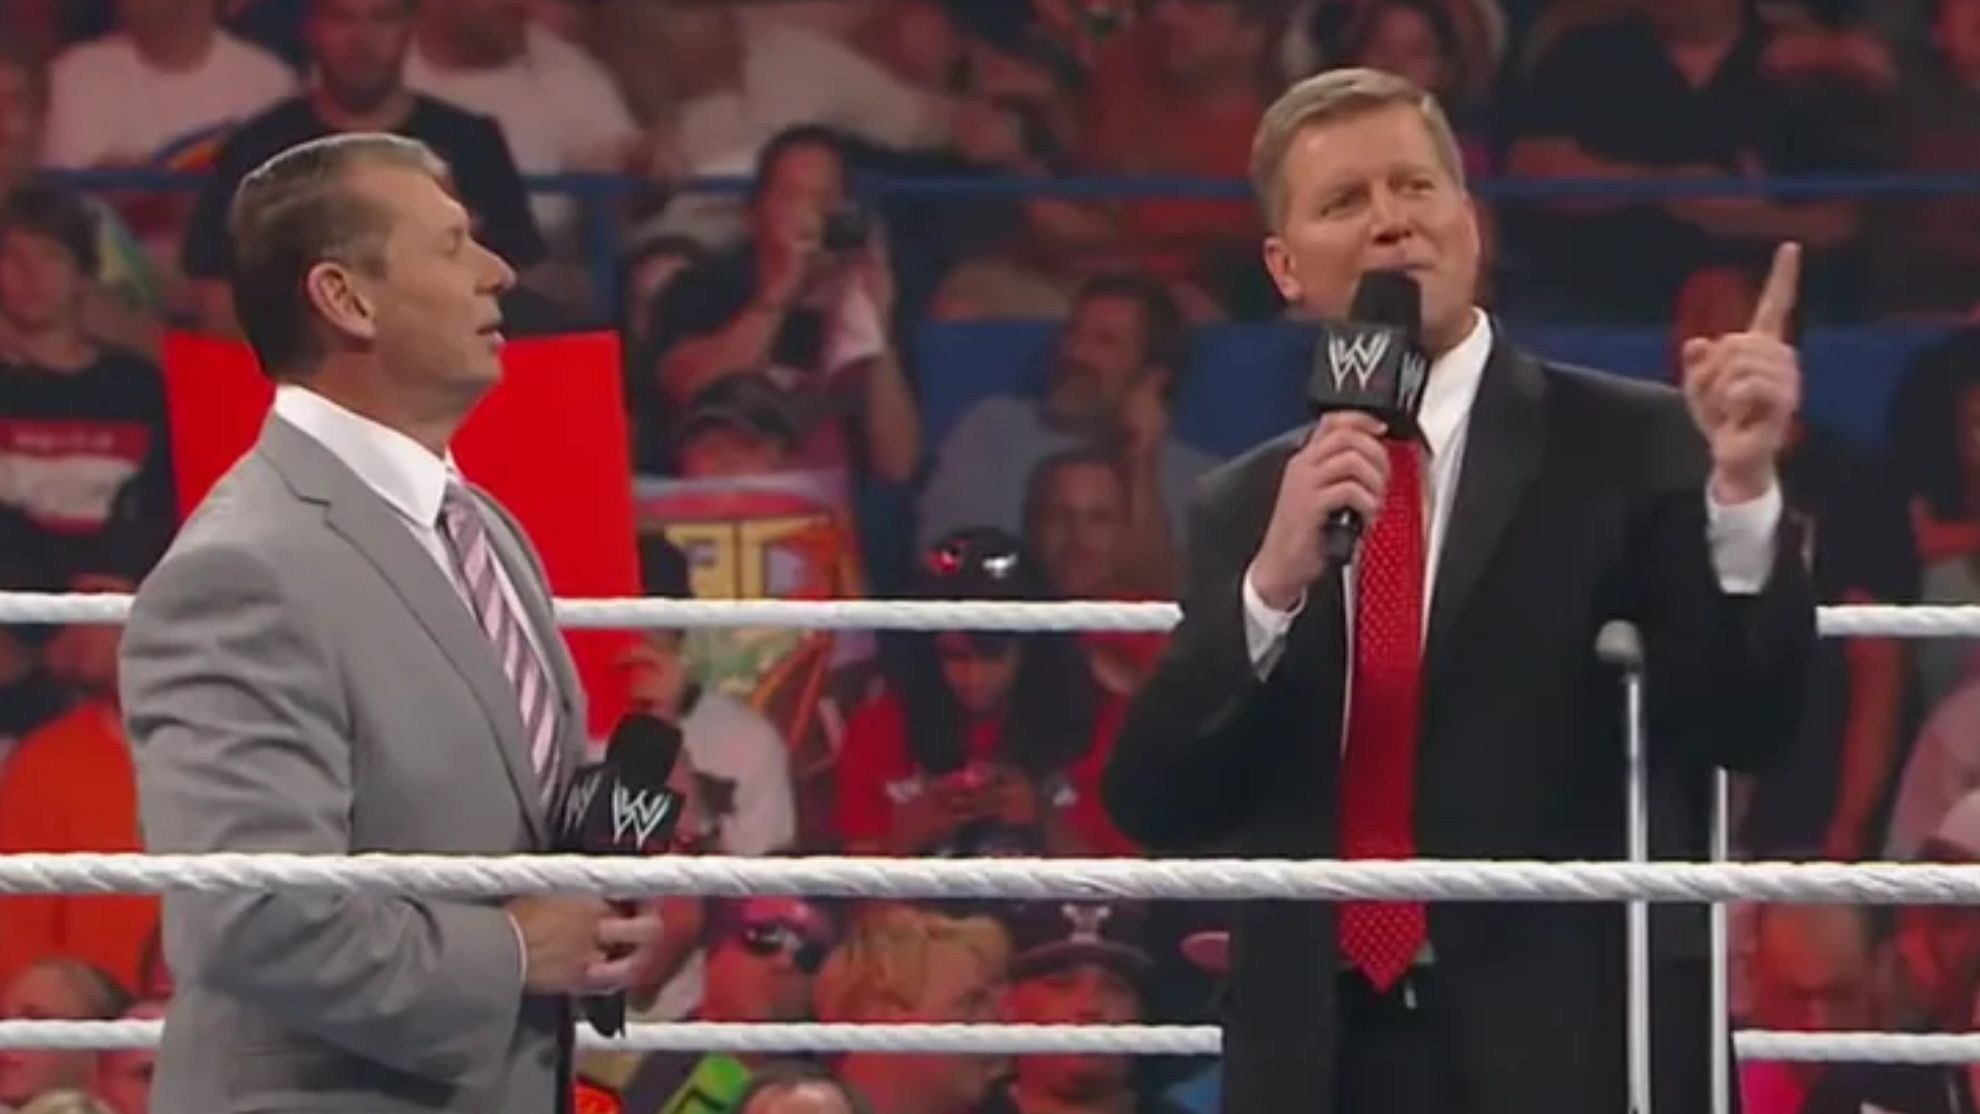 Vince McMahon (left) and John Laurinaitis (right)